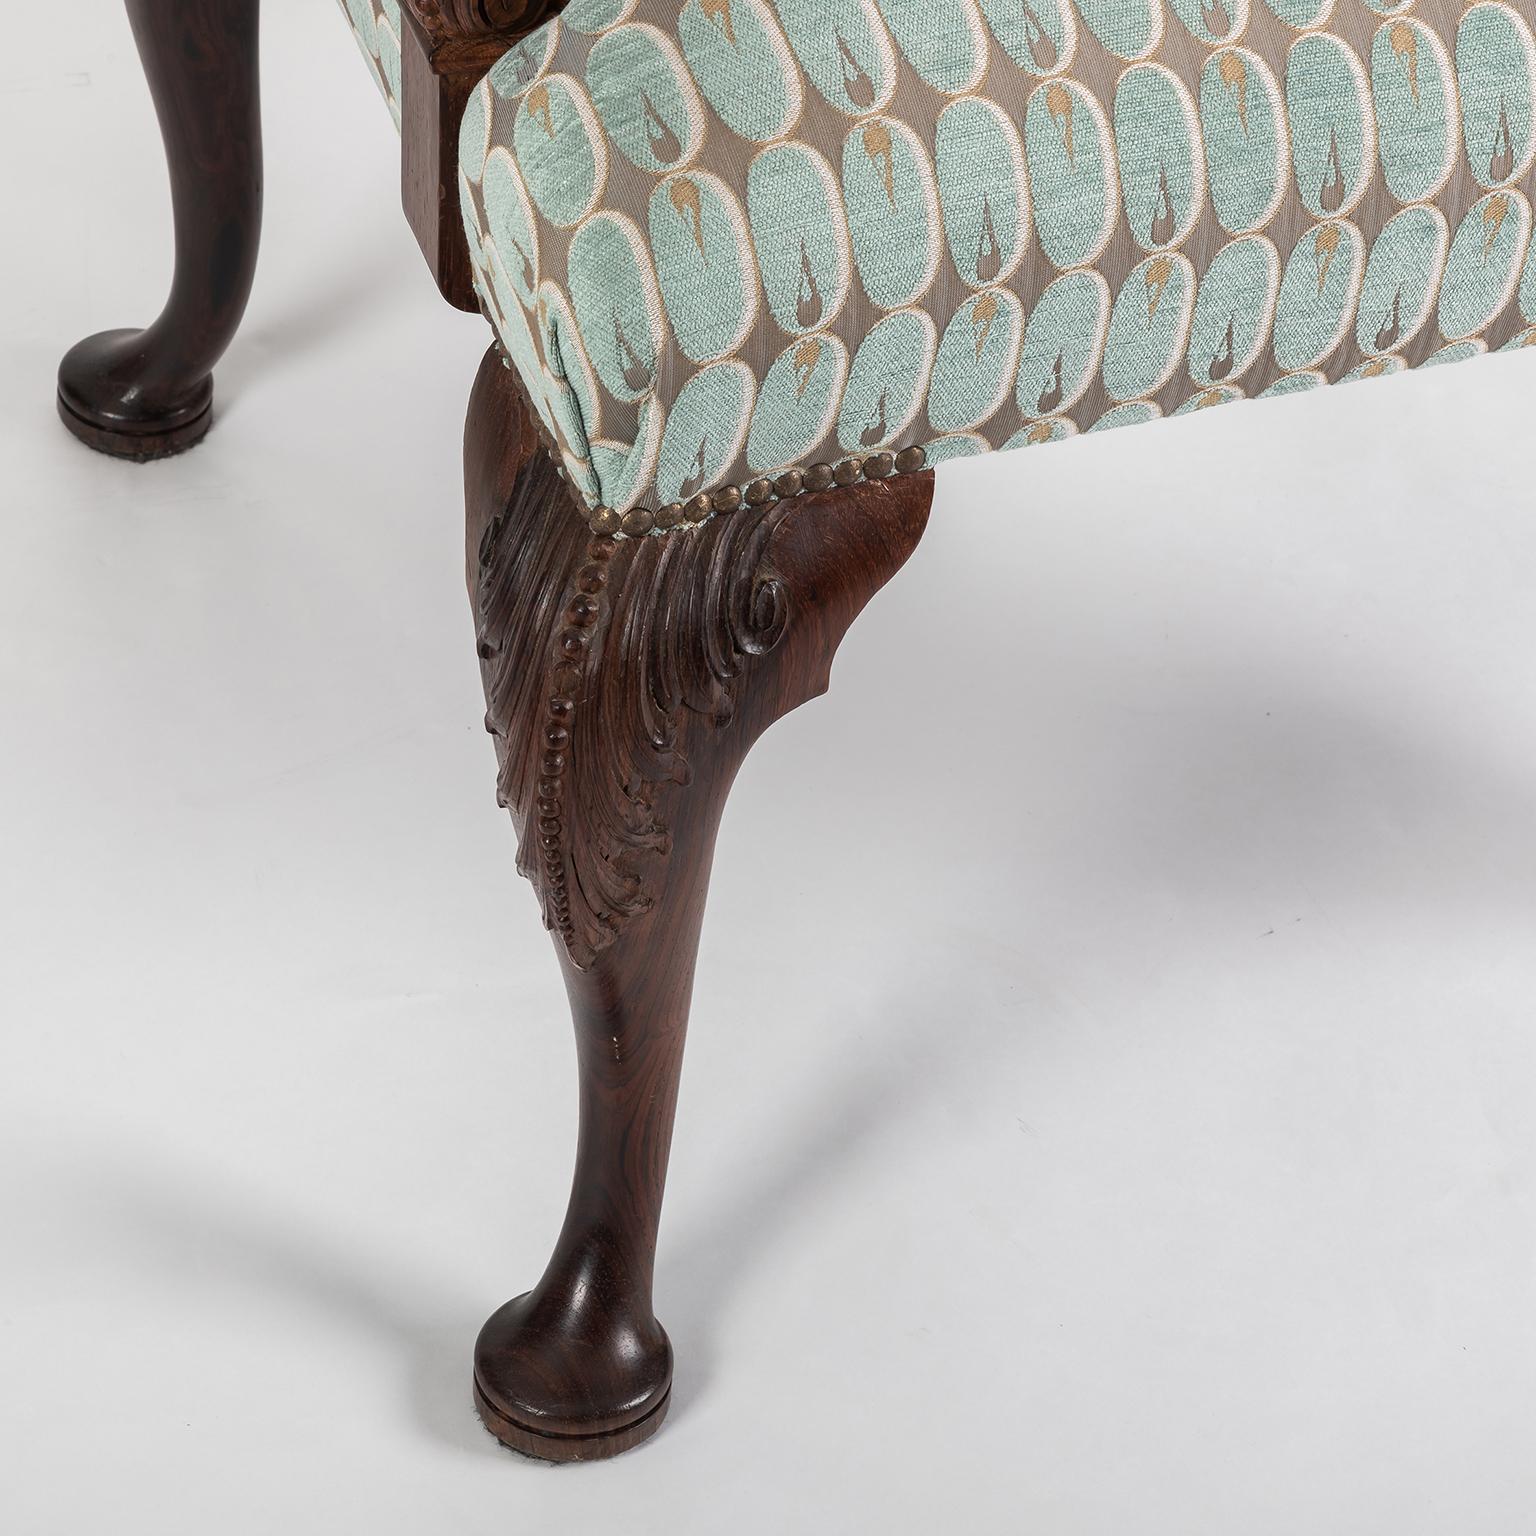 Hand Carved English Georgian Style Armchair in Kravet Fabric, Late 19th Century For Sale 1